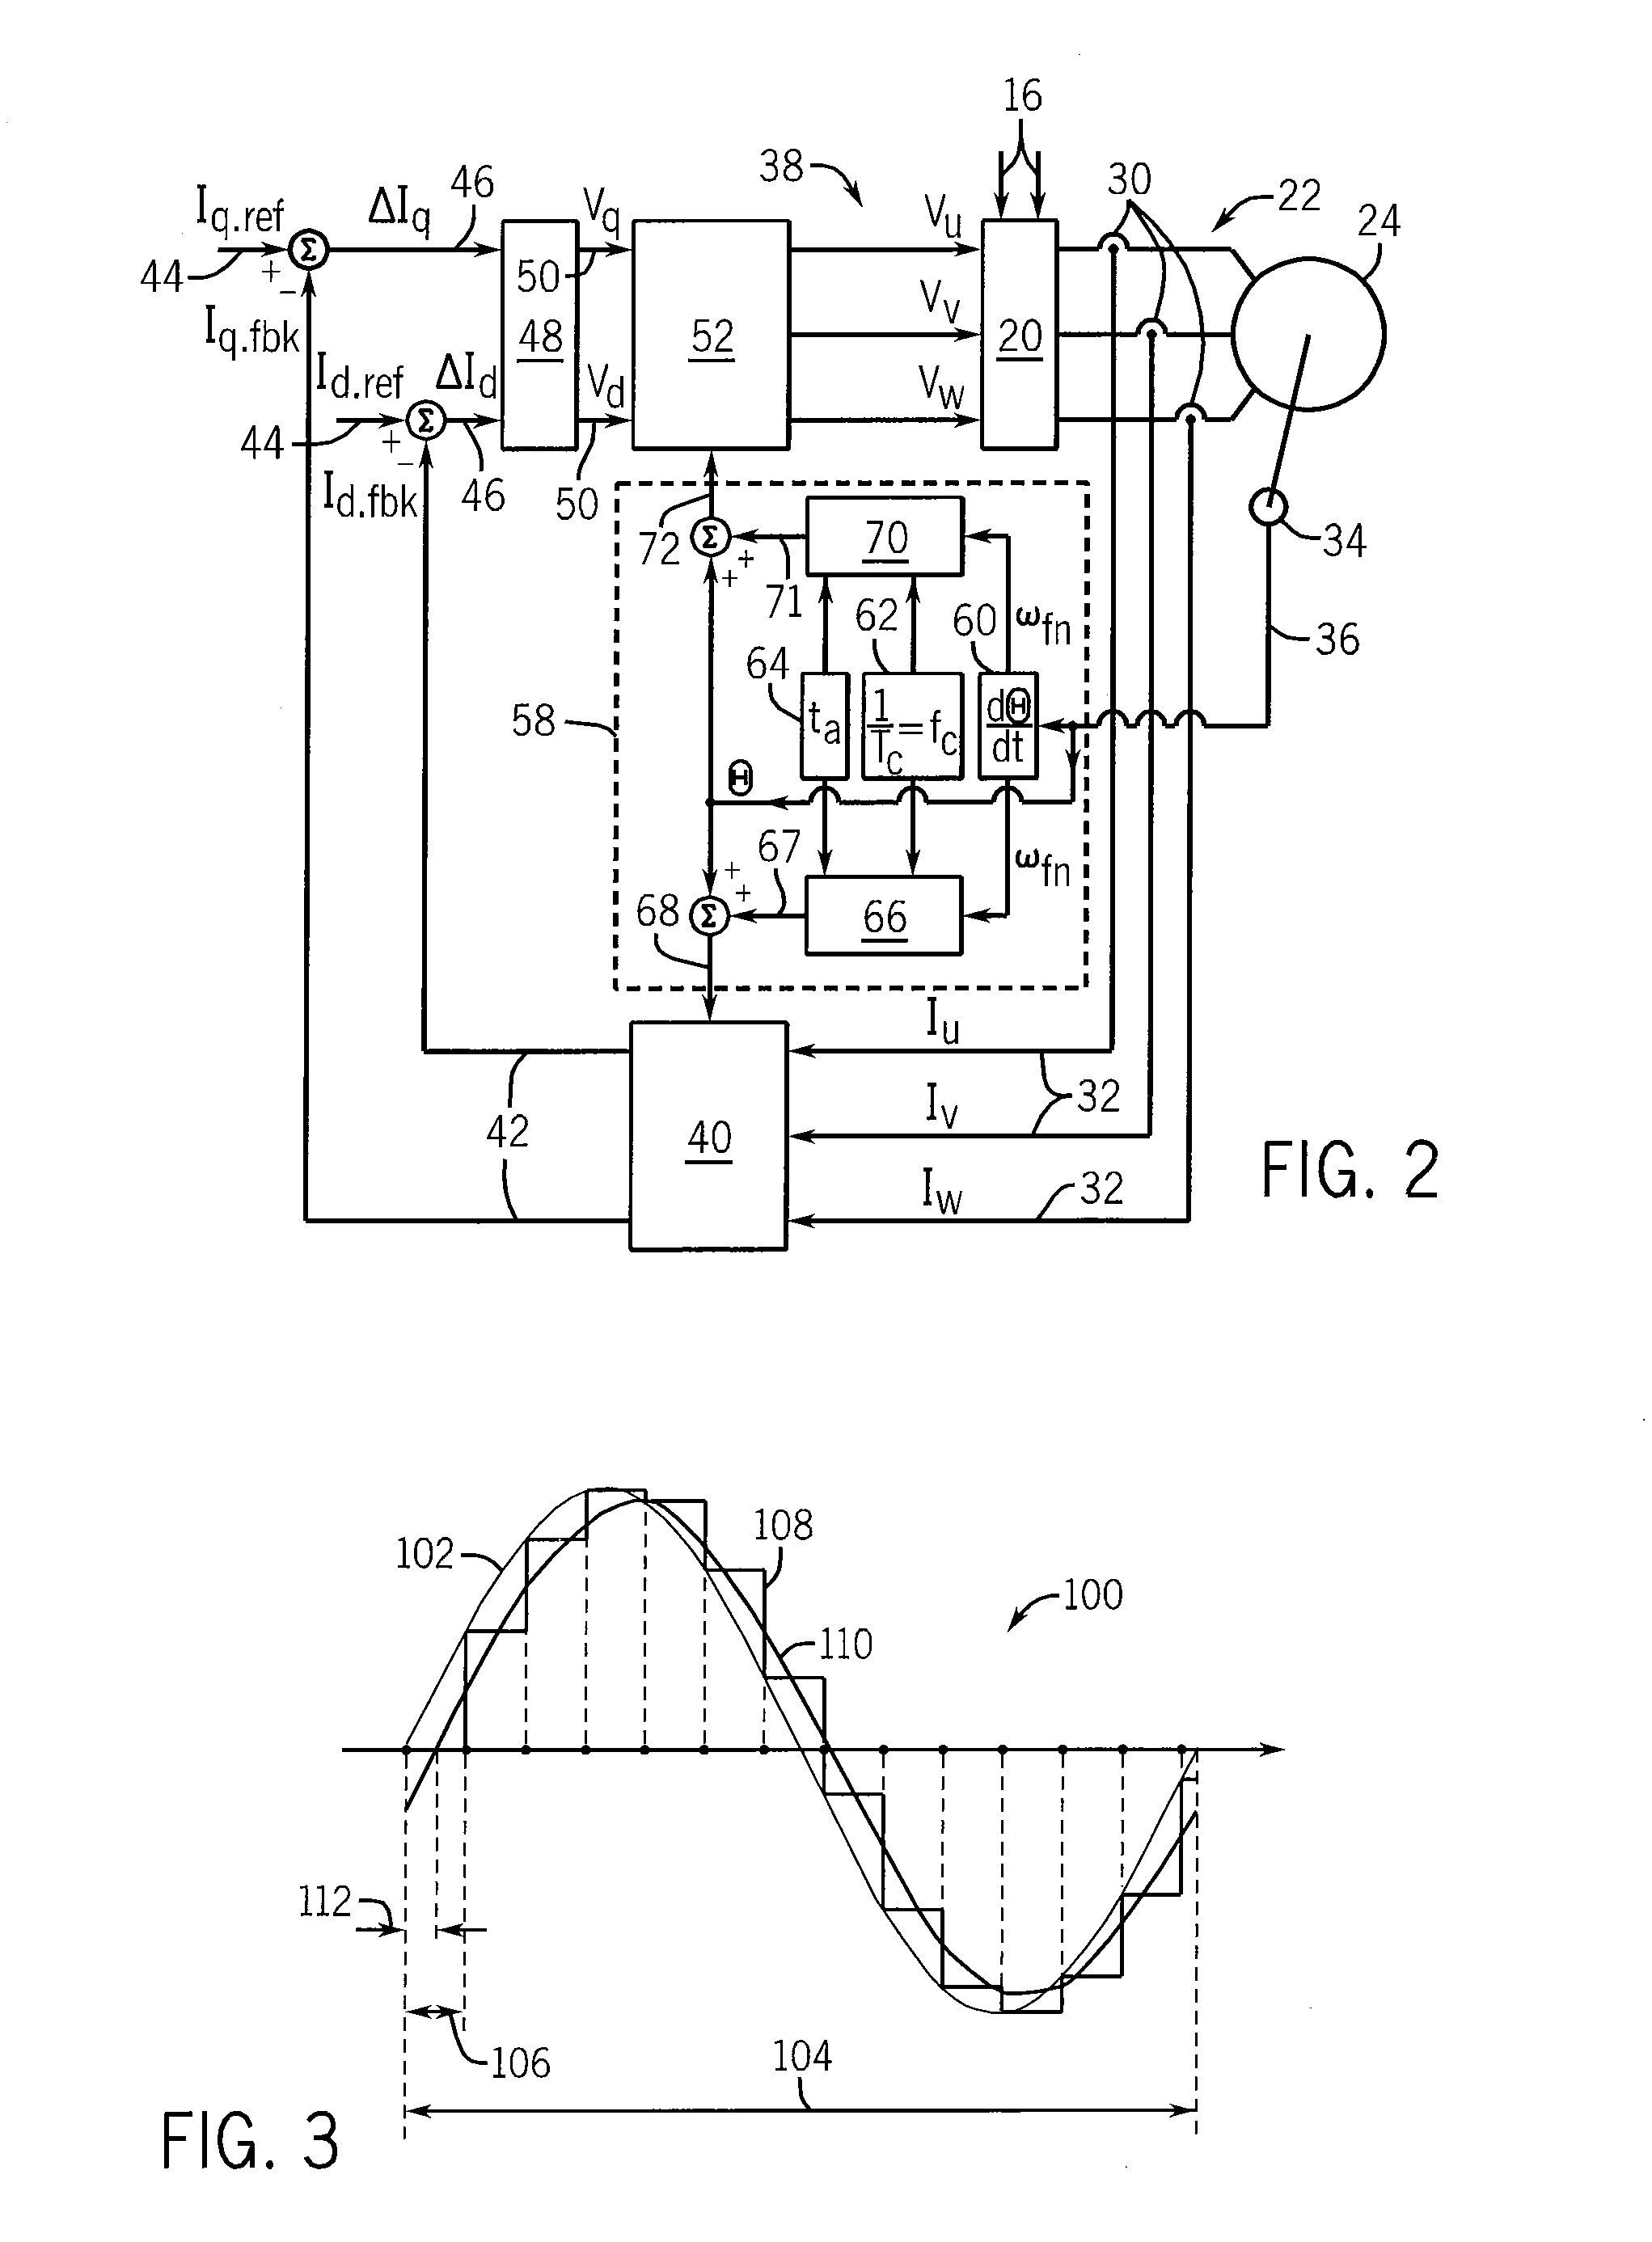 Method and Apparatus for Increased Current Stability in a PWM Drive